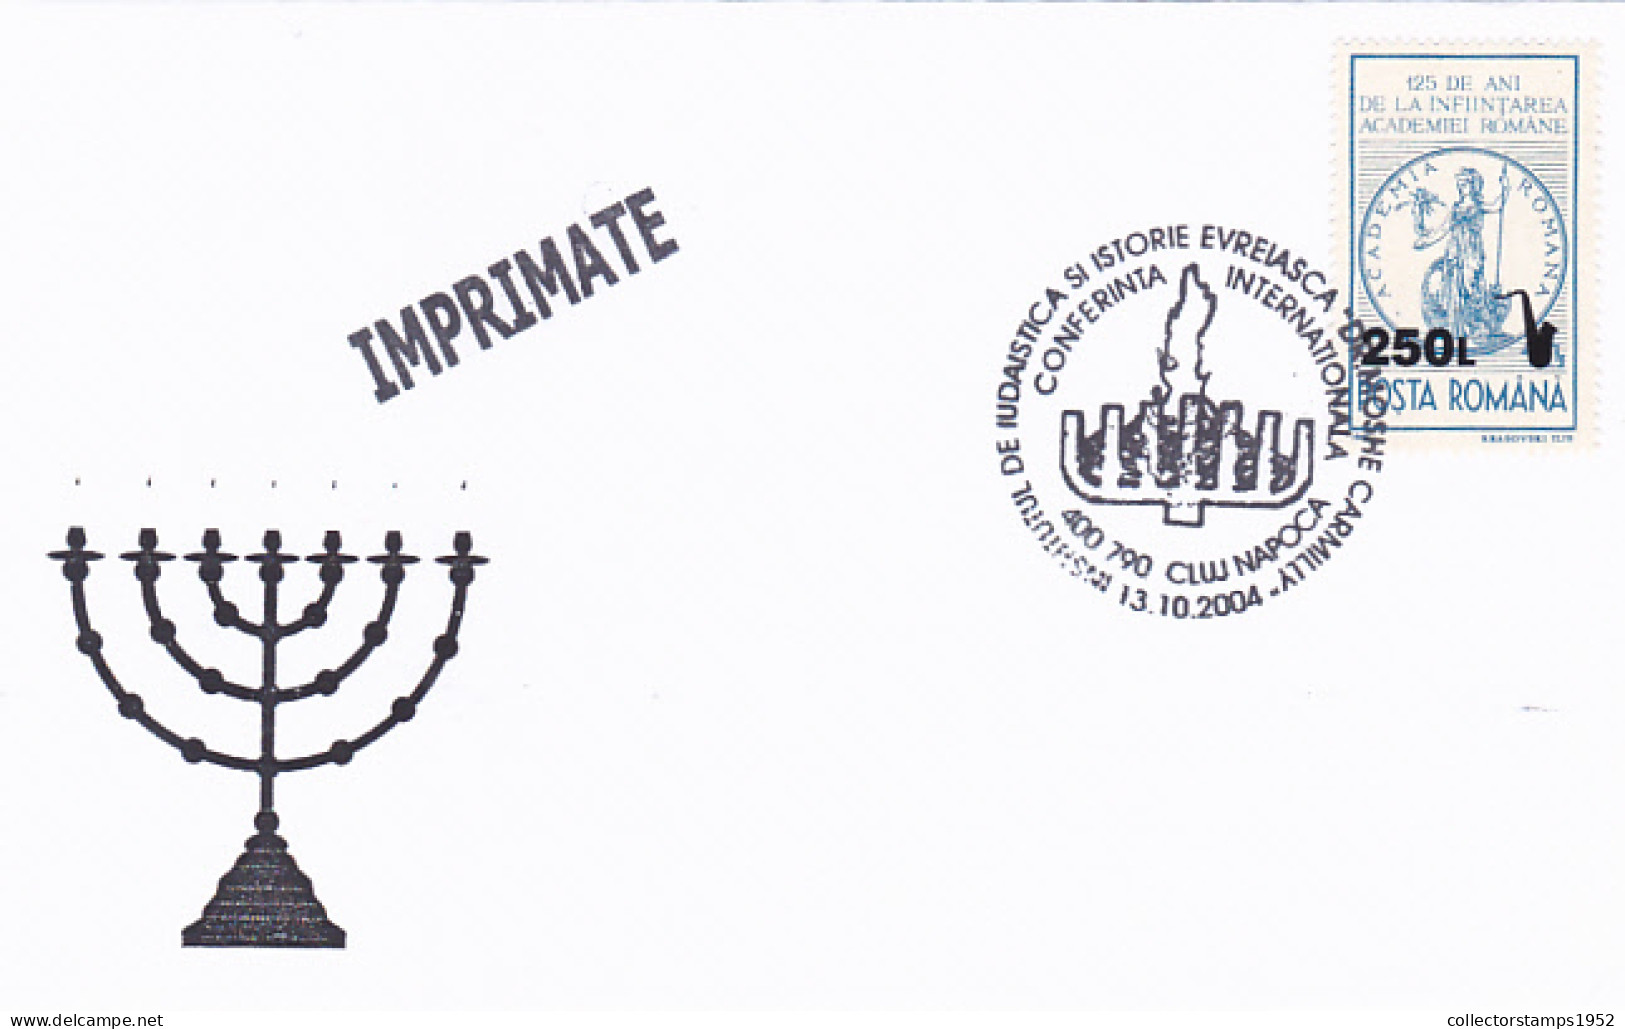 MOSHE CARMILLY JEWISH INSTITUTE, CONFERENCE, JEWISH, RELIGION, SPECIAL COVER, OVERPRINT STAMP, 2004, ROMANIA - Judaisme